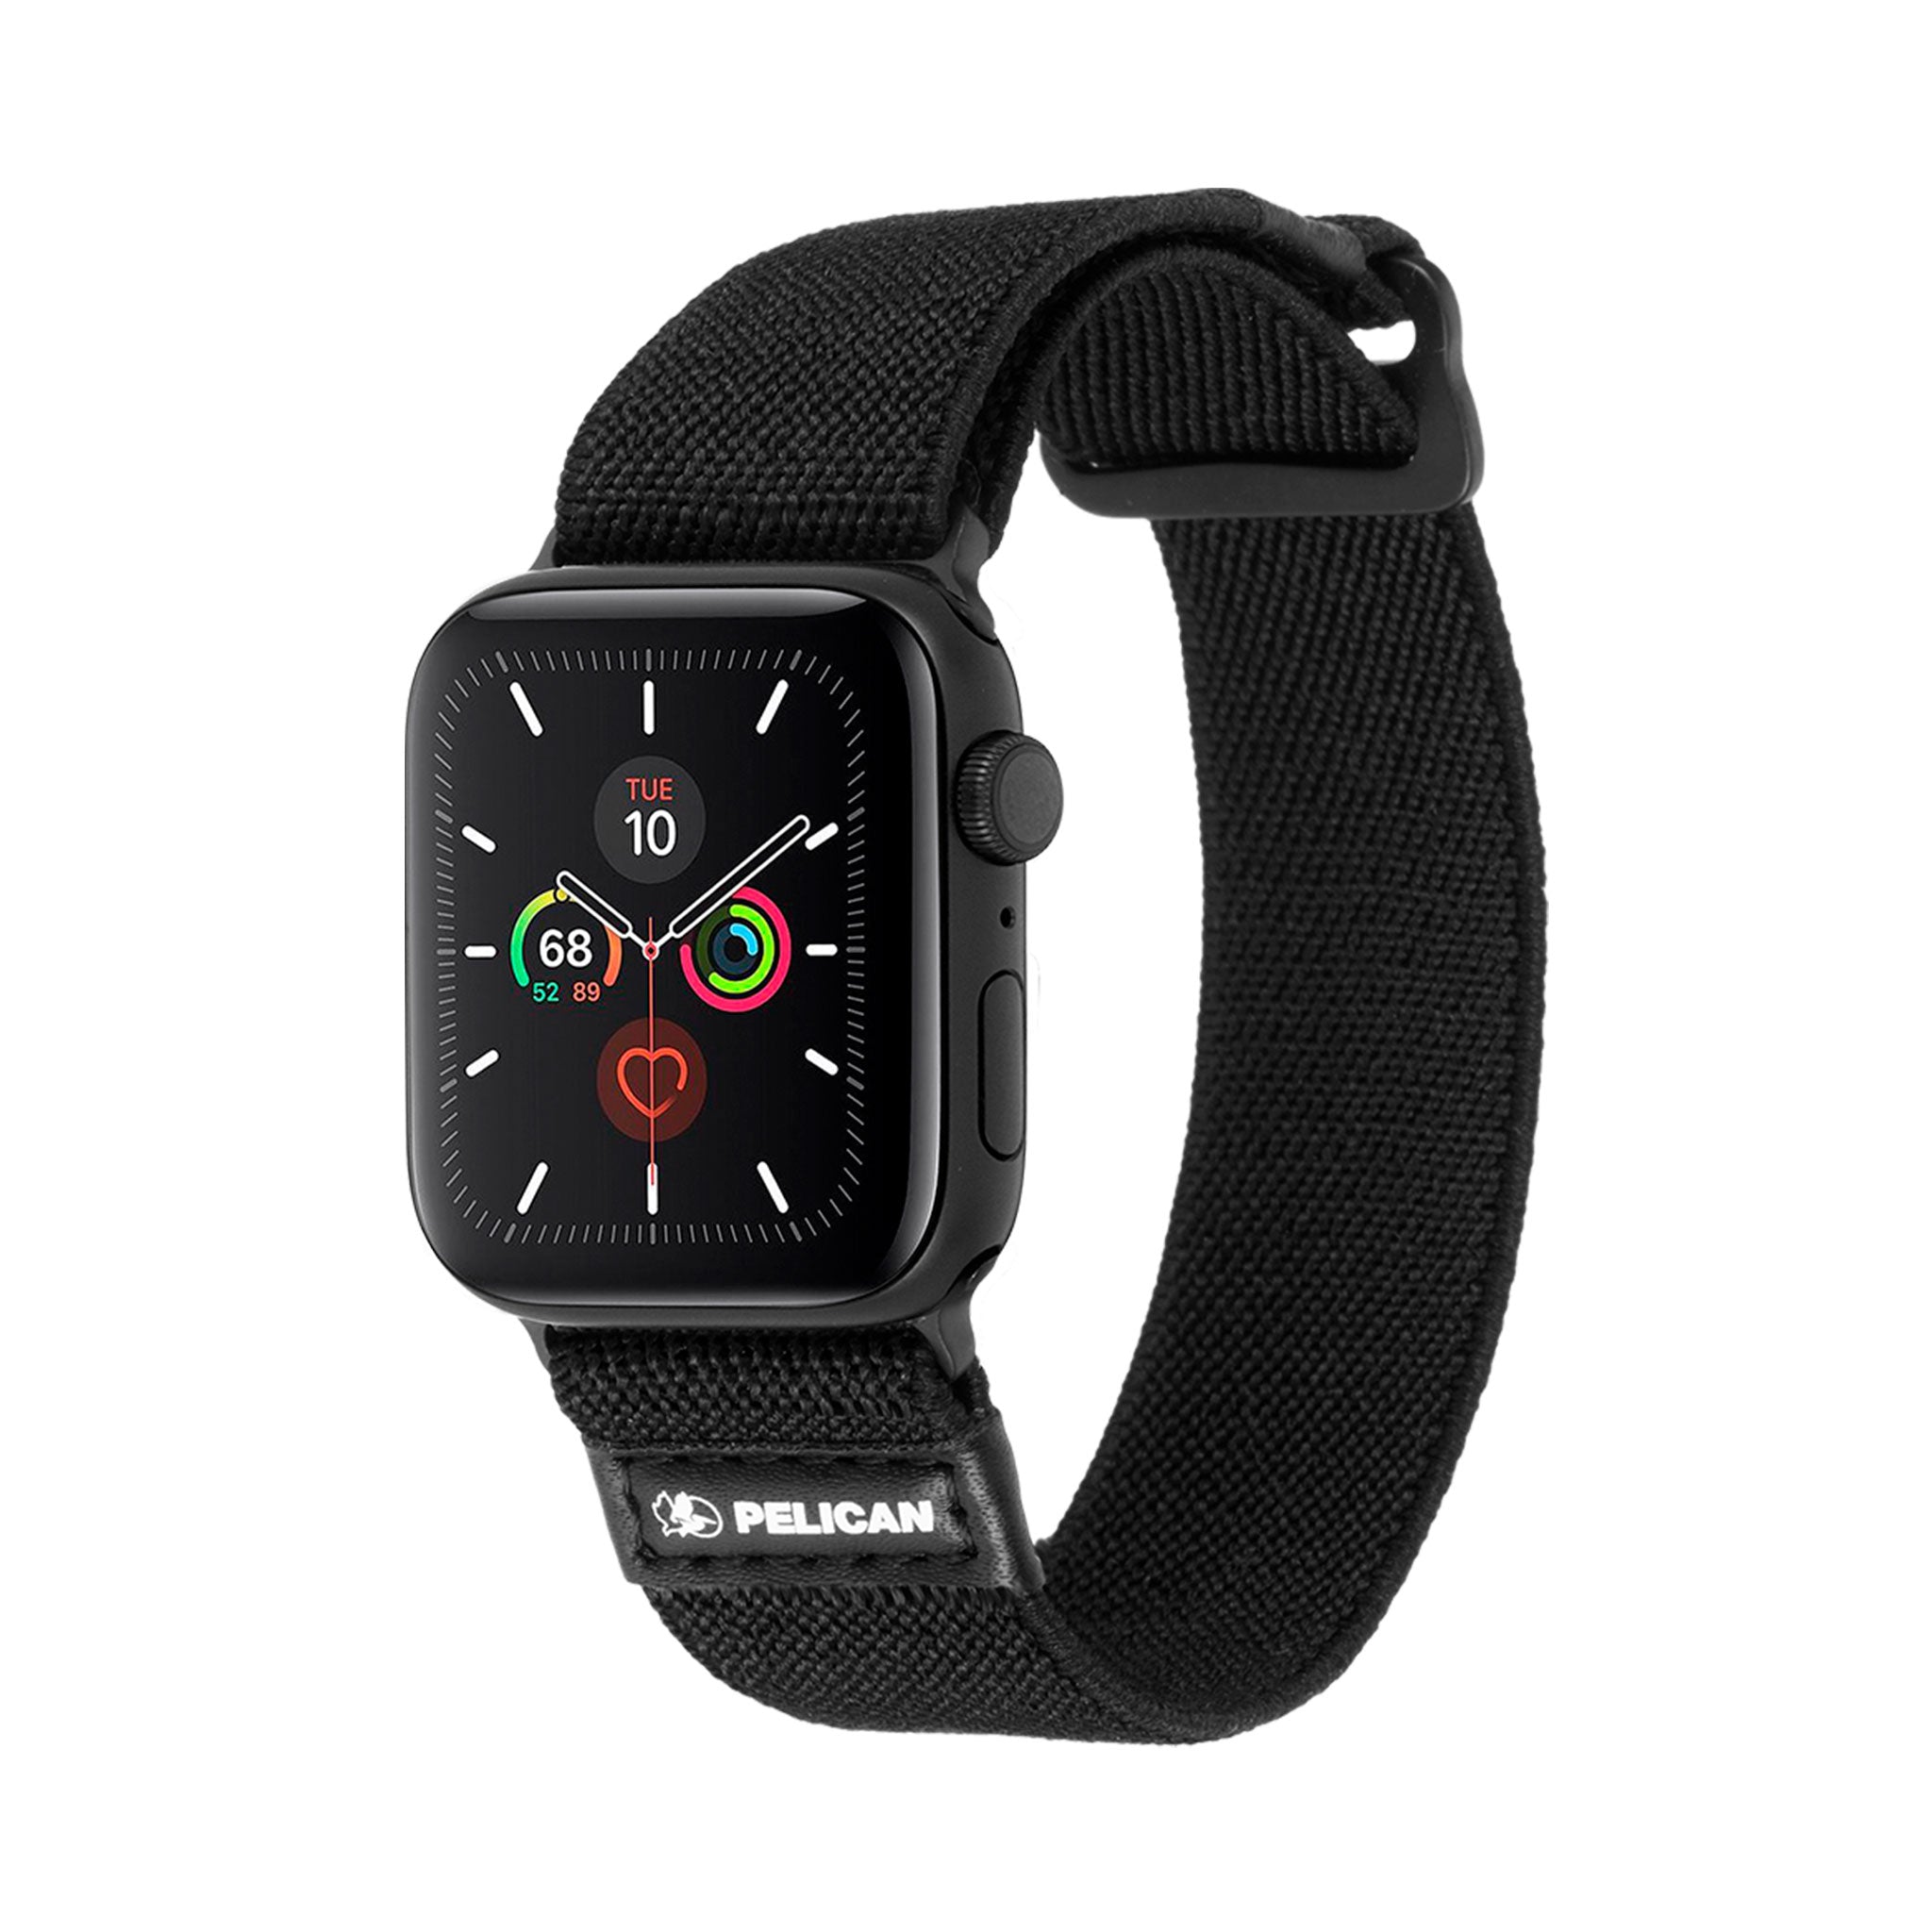 Pelican - Protector Watch Band For Apple Watch 38mm / 40mm - Black